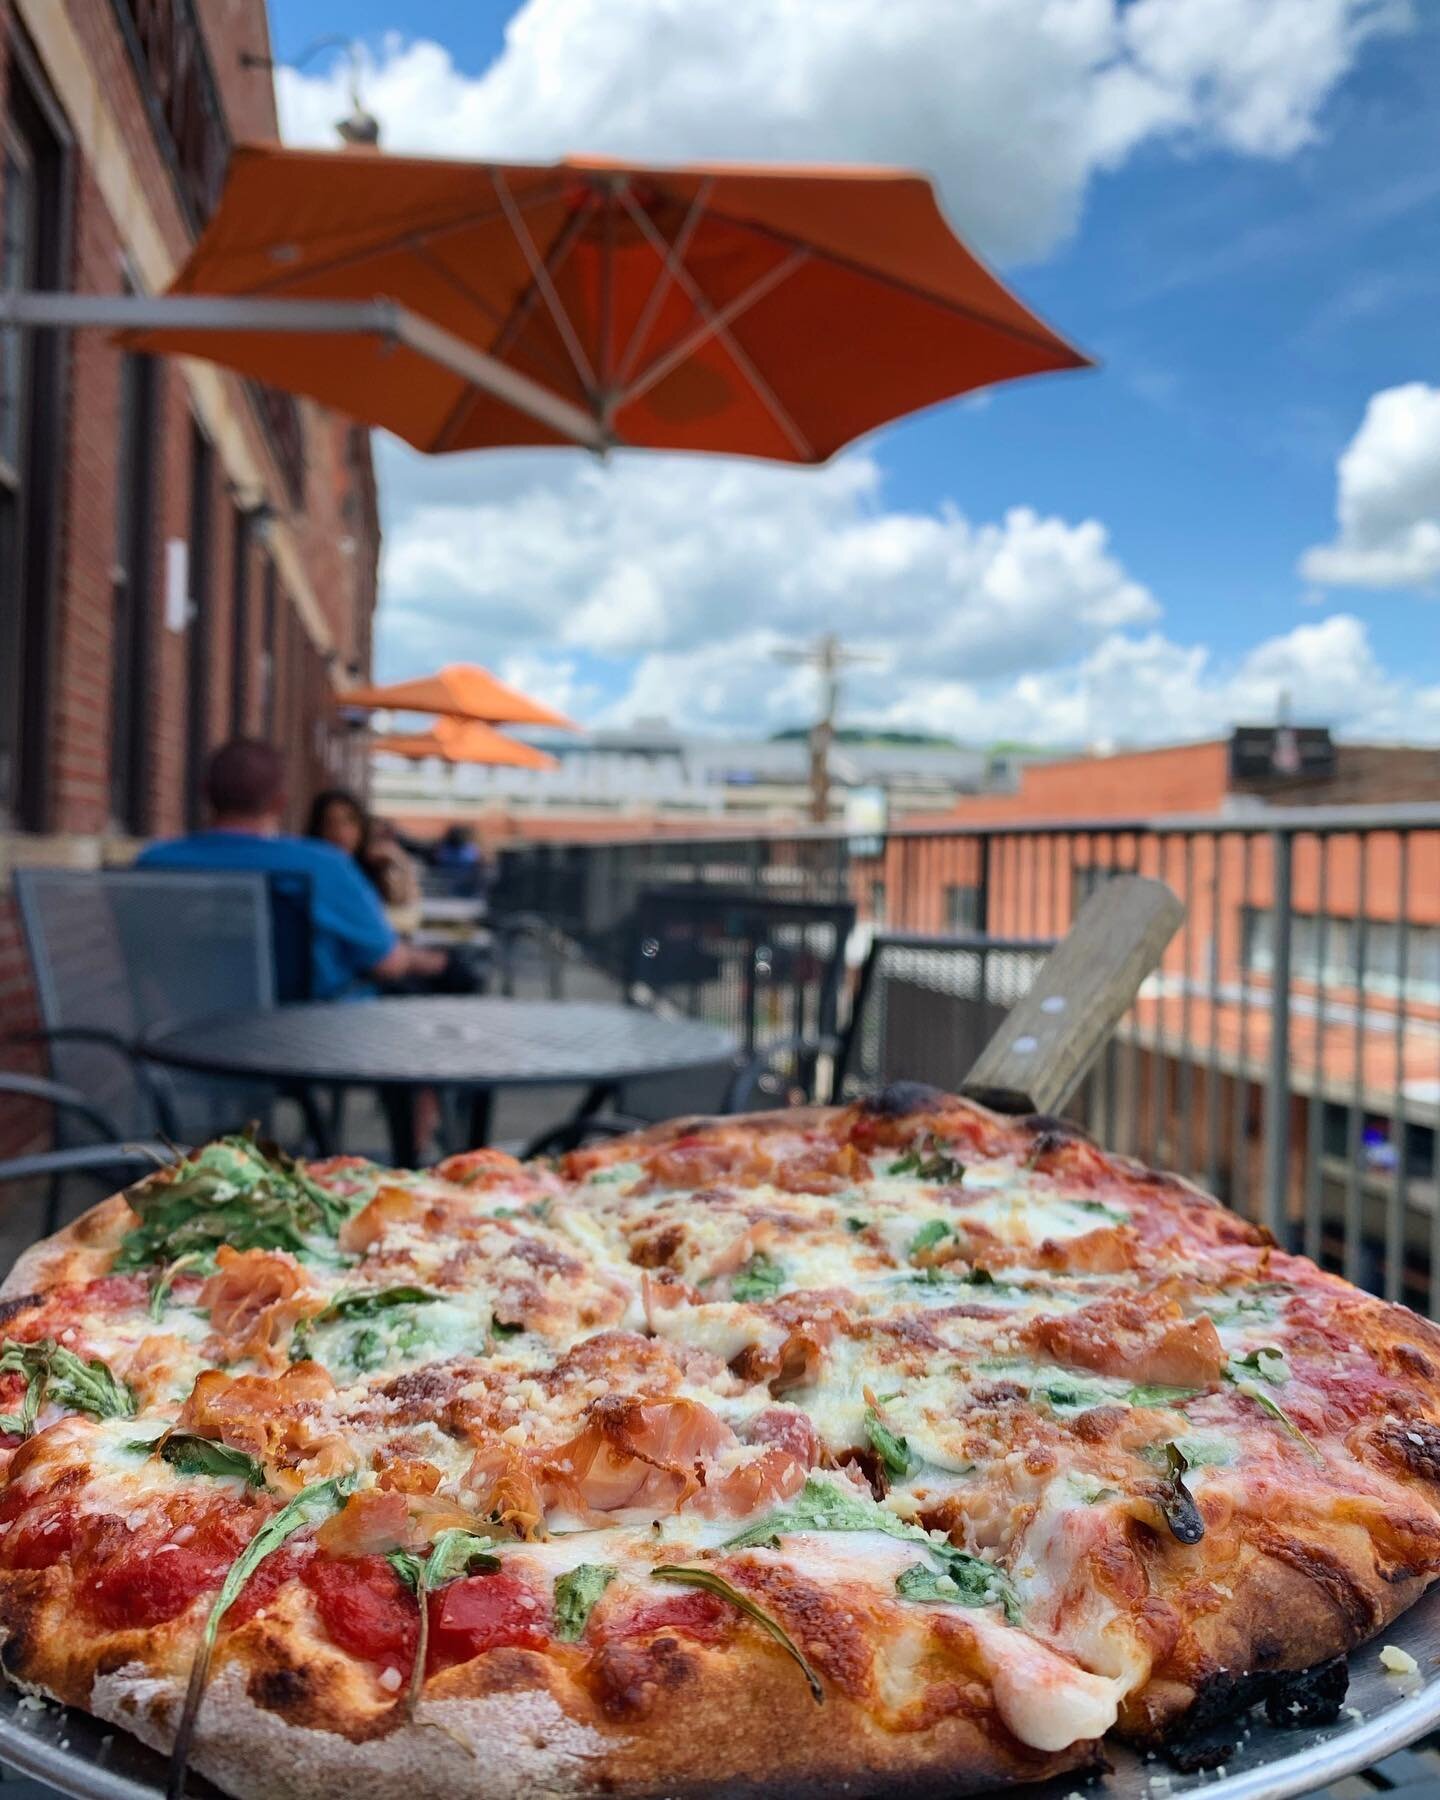 Happy #memorialdayweekend 🇺🇸🍕🍺
Enjoy refreshing drinks and hot pizza on our balcony with us today 🌞 

@thepamarket 11-5pm!